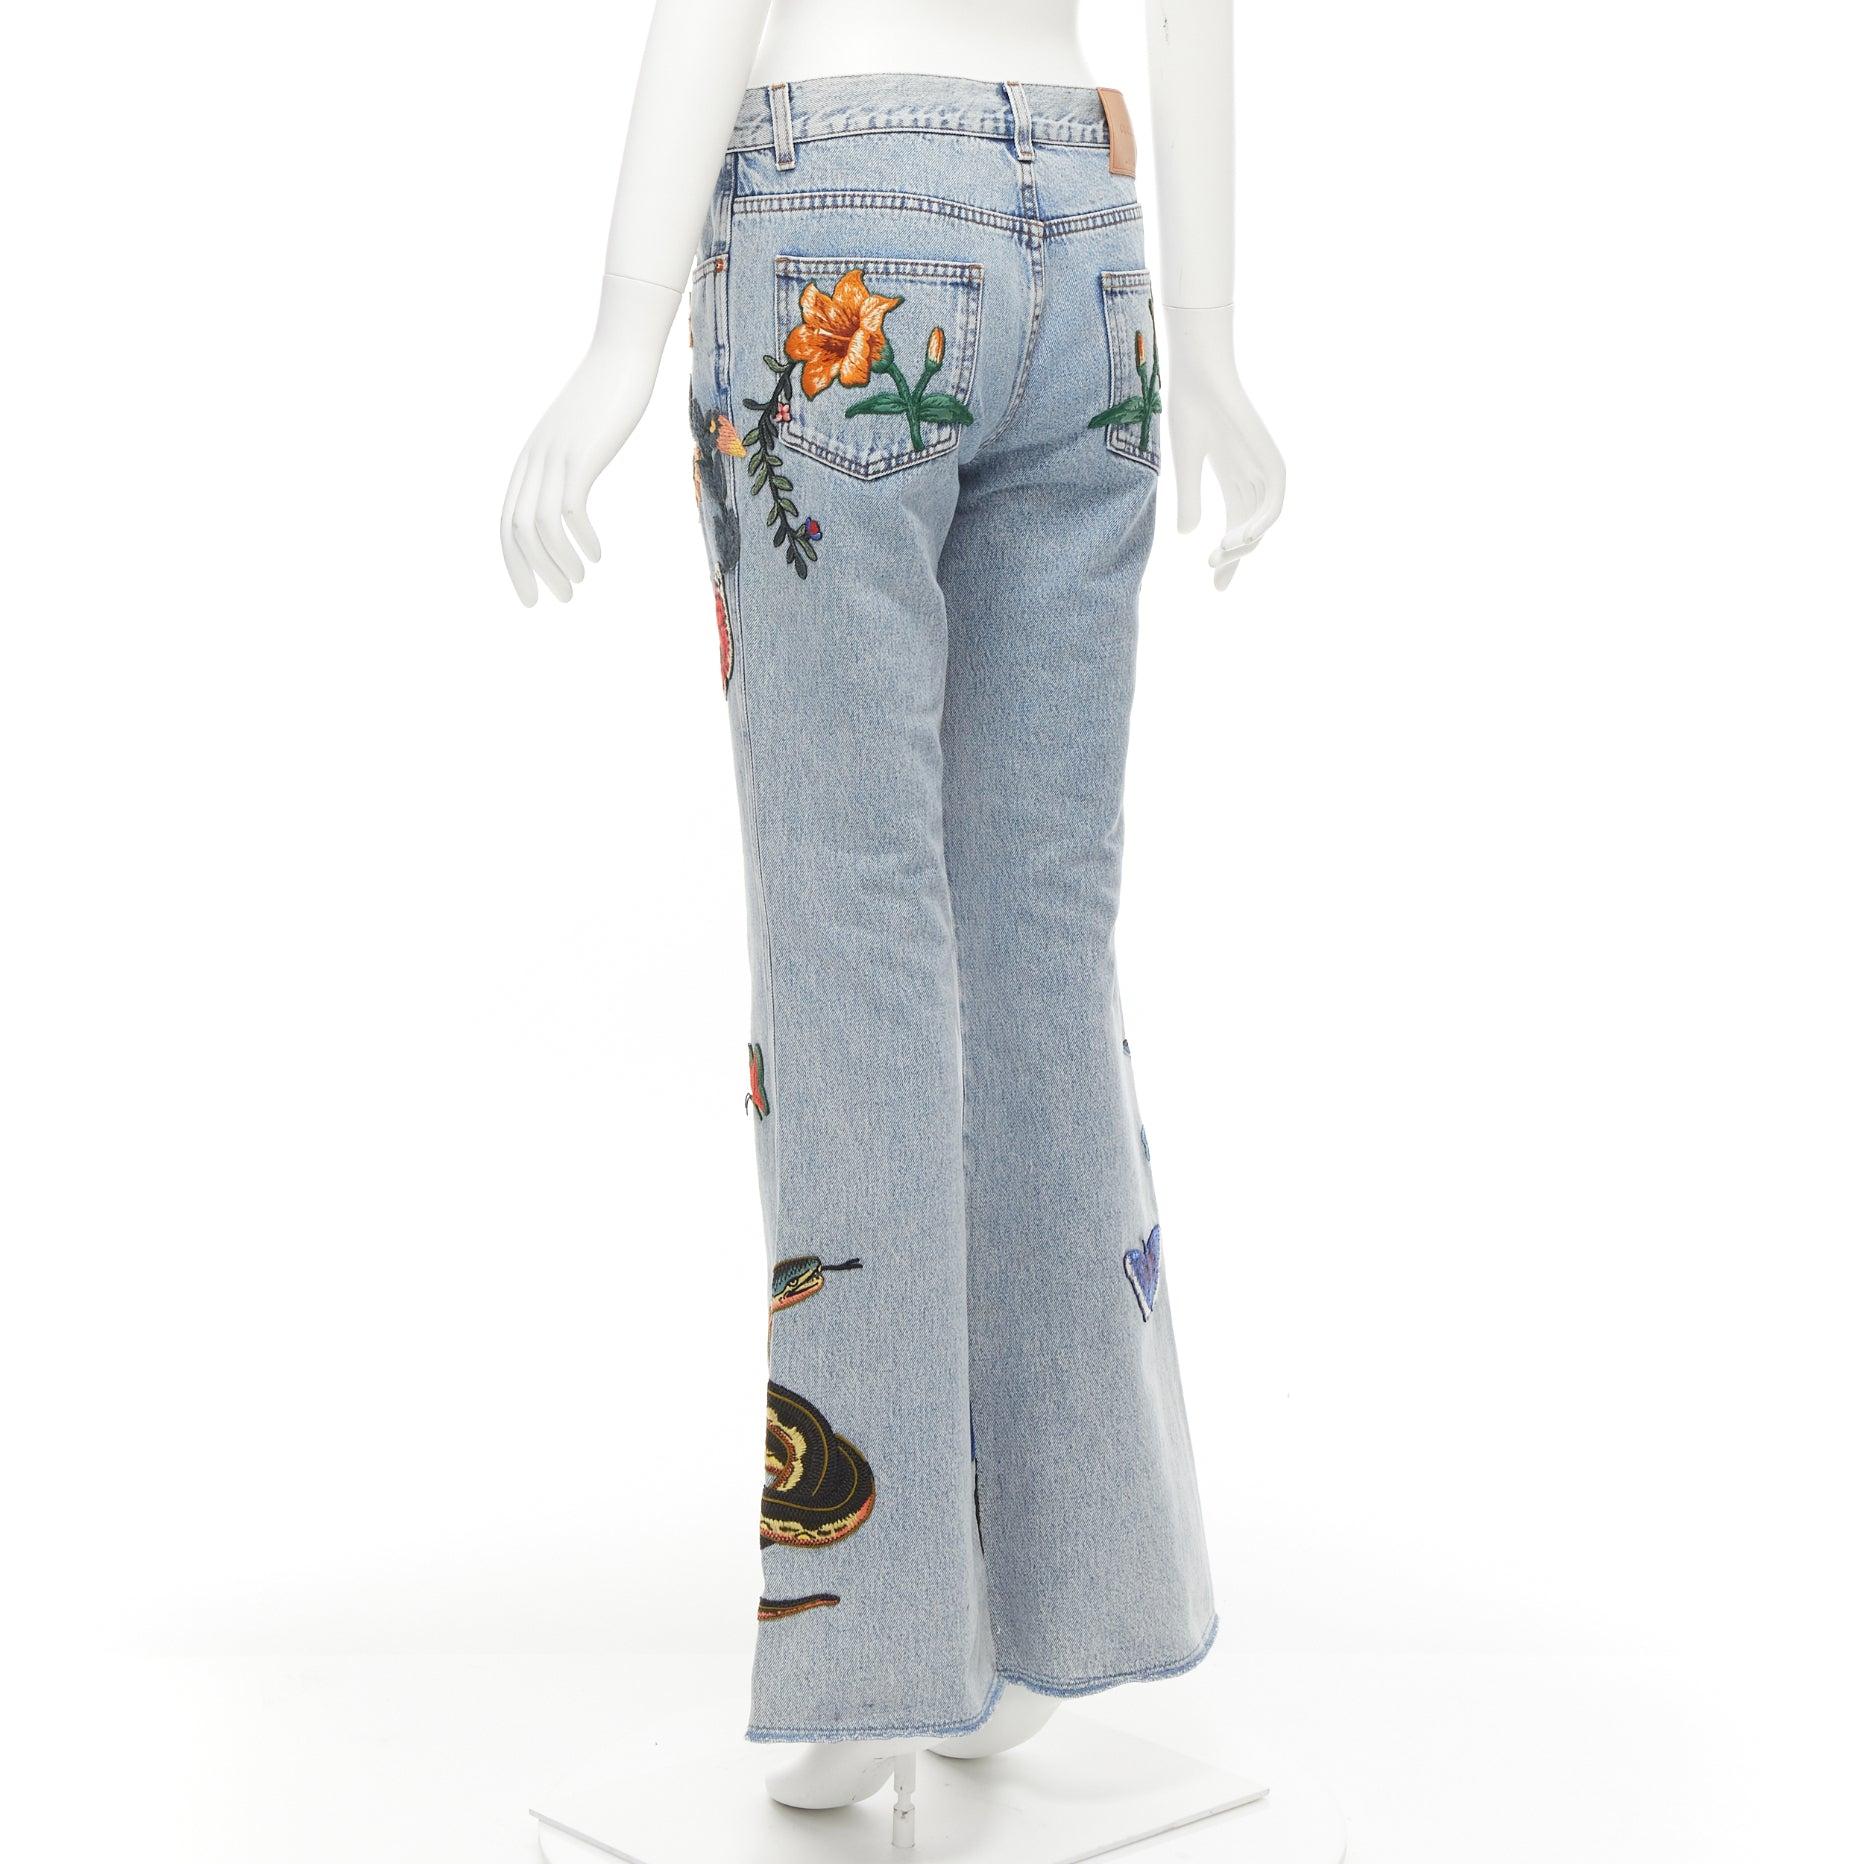 Women's GUCCI Alessandro Michele flower embroidery patch flare hippie jeans 24